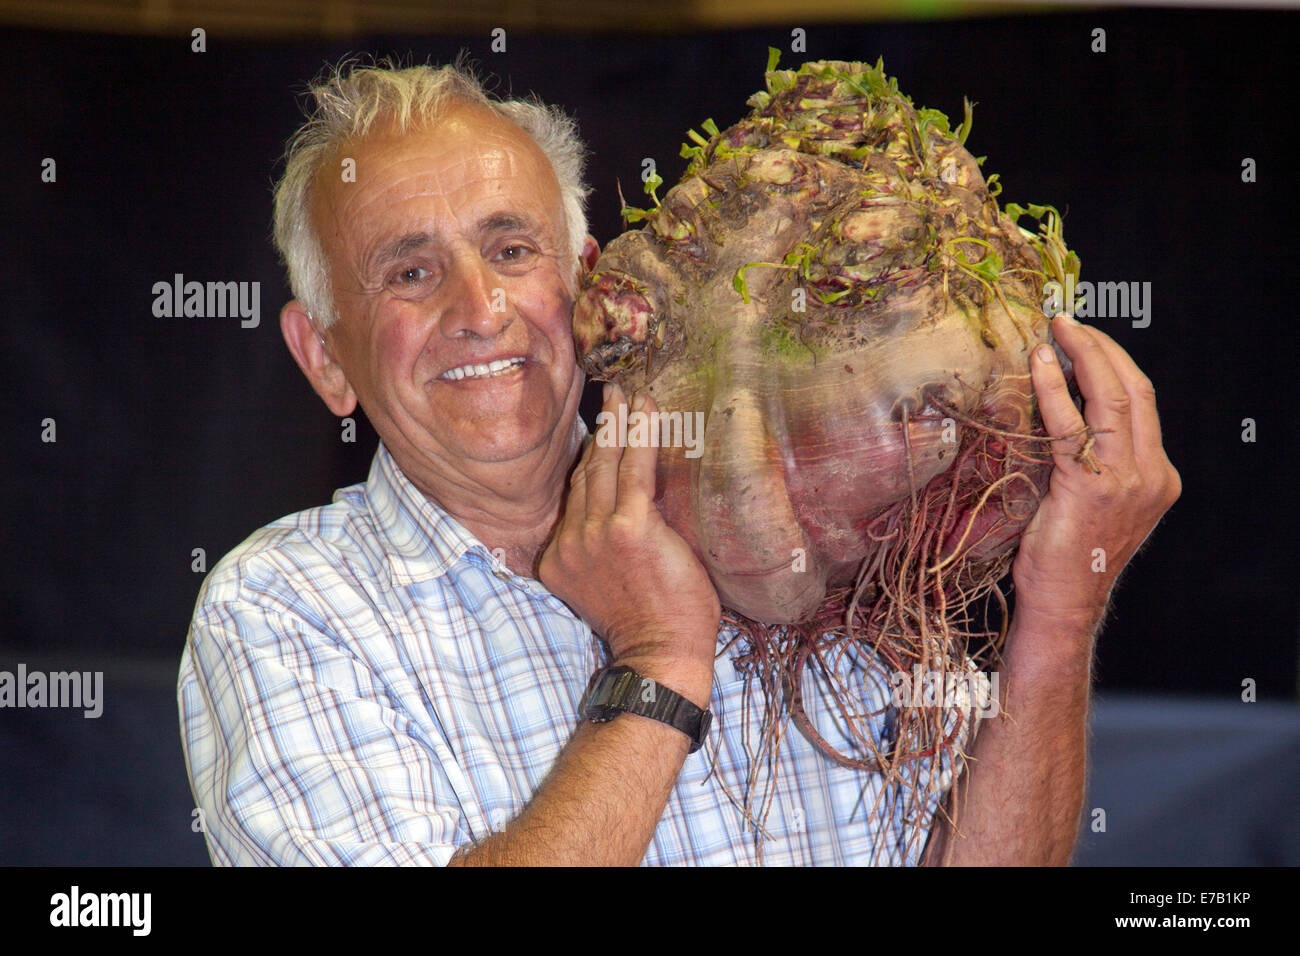 Harrogate, Yorkshire, UK. 11th Sept, 2014.  Ian Neale with Giant Vegetable, a beetroot weighing 28lbs 4ozs, at the Harrogate Annual Autumn Flower Show, attractions include the giant vegetable competition, is ranked as one of Britain's top three gardening events, the show being  ranked as one of Britain's top three gardening events. Credit:  Mar Photographics/Alamy Live News. Stock Photo